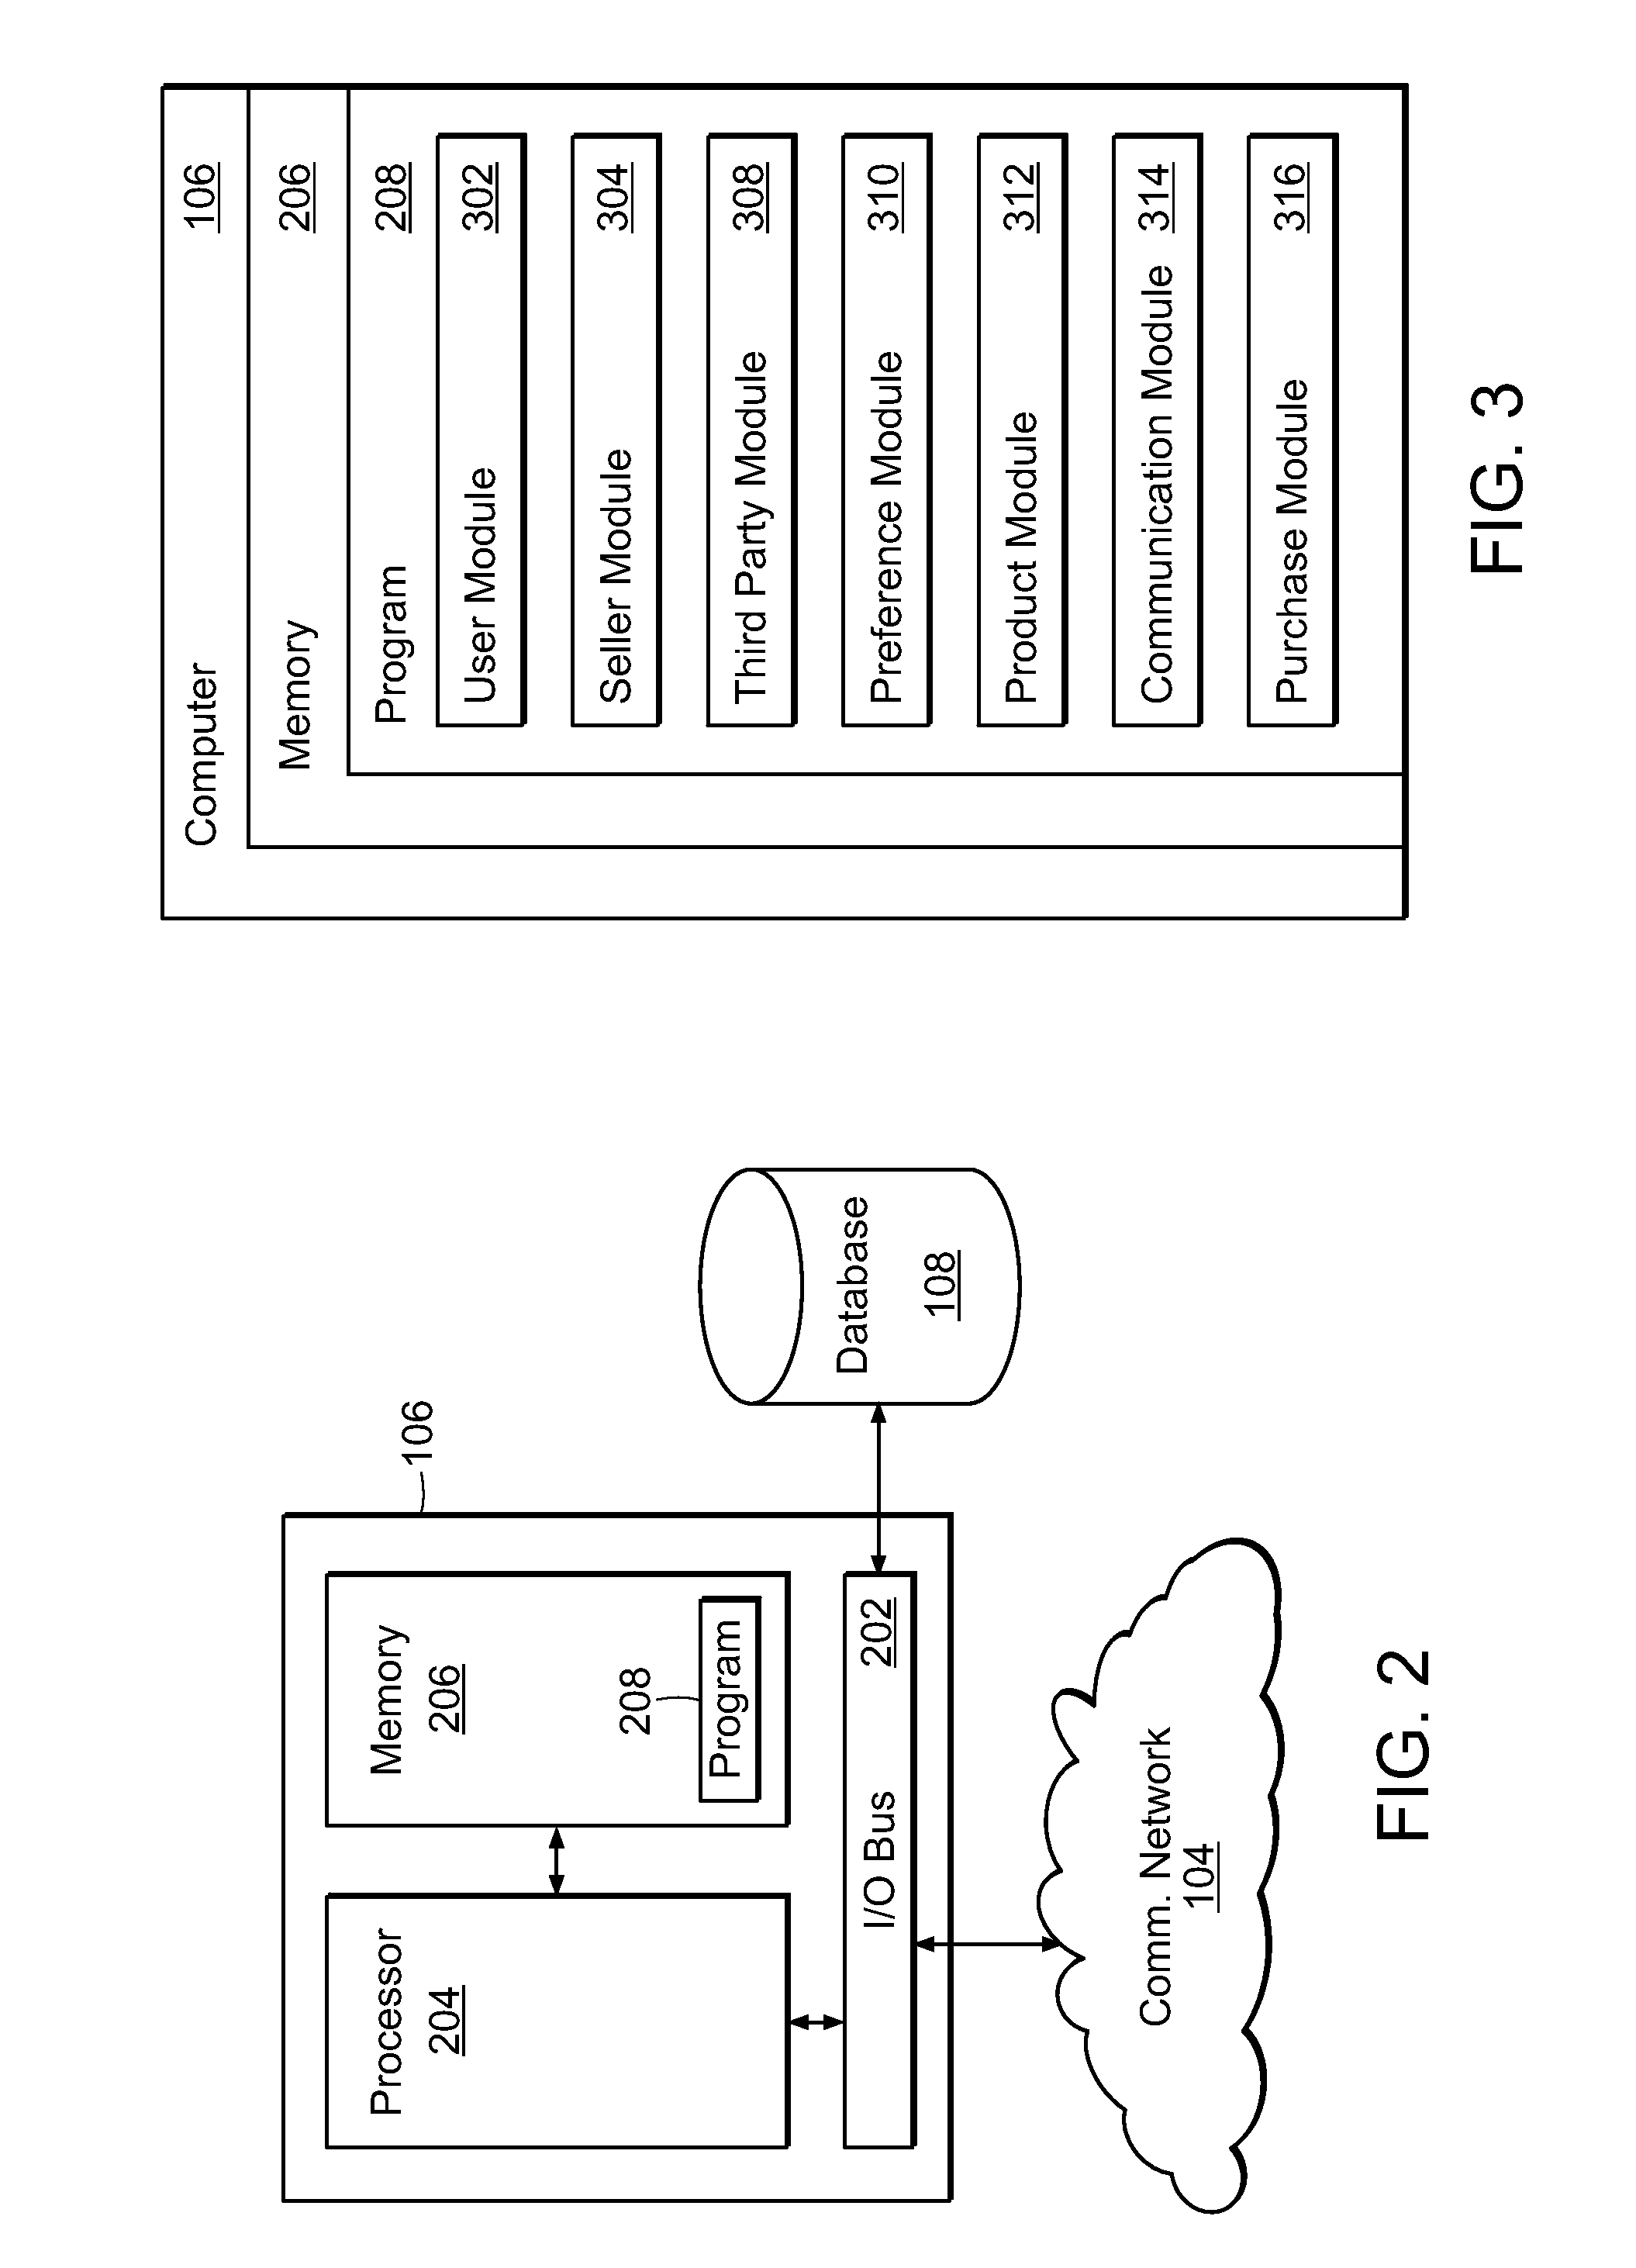 System and method for enabling a real time shared shopping experience